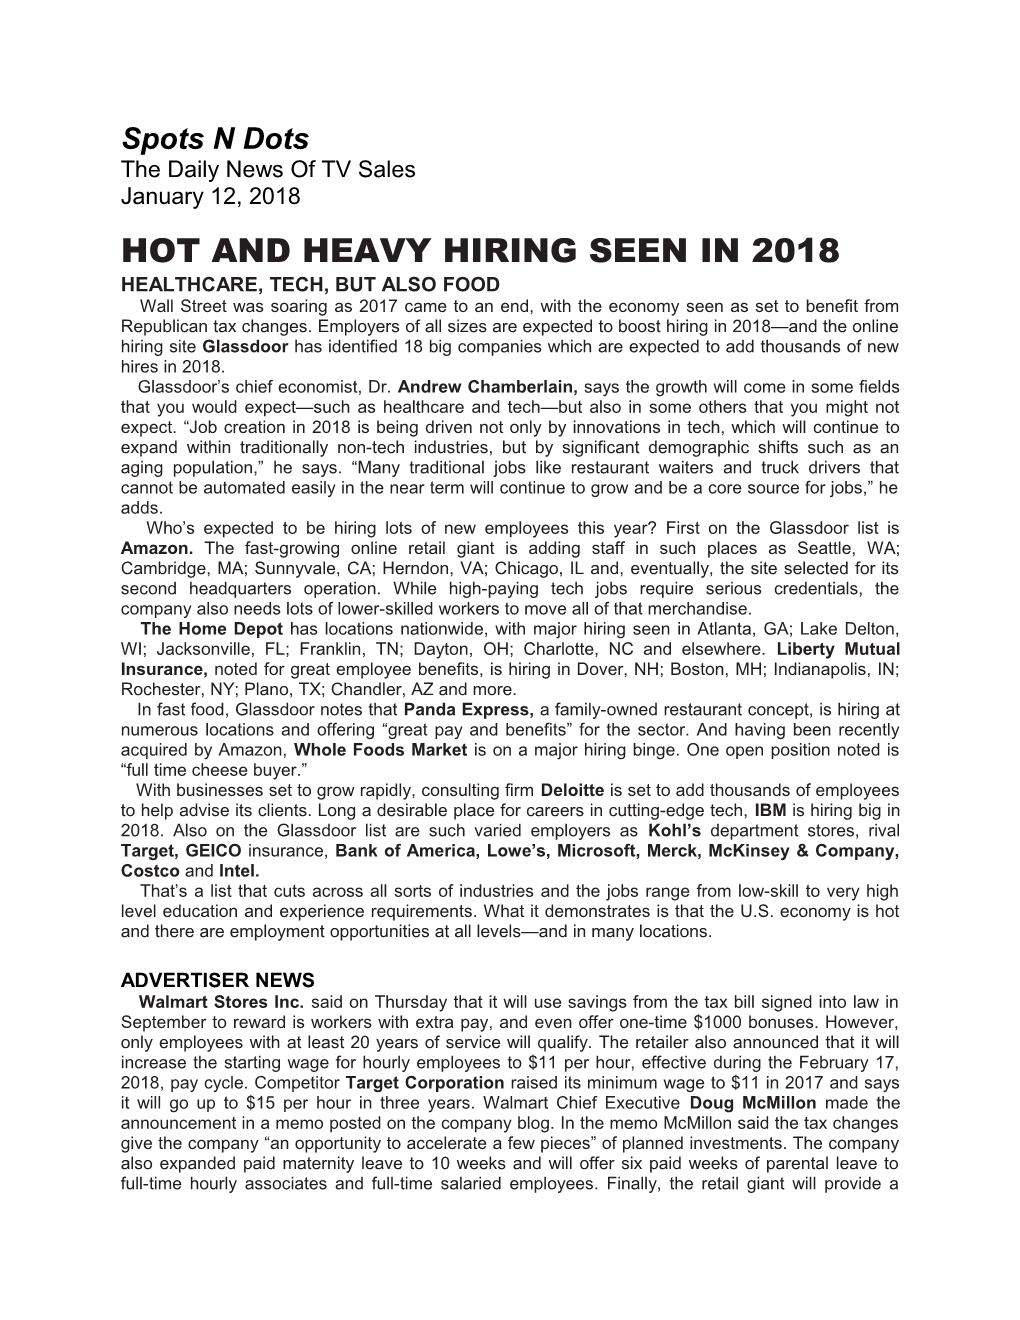 Hot and Heavy Hiring Seen in 2018